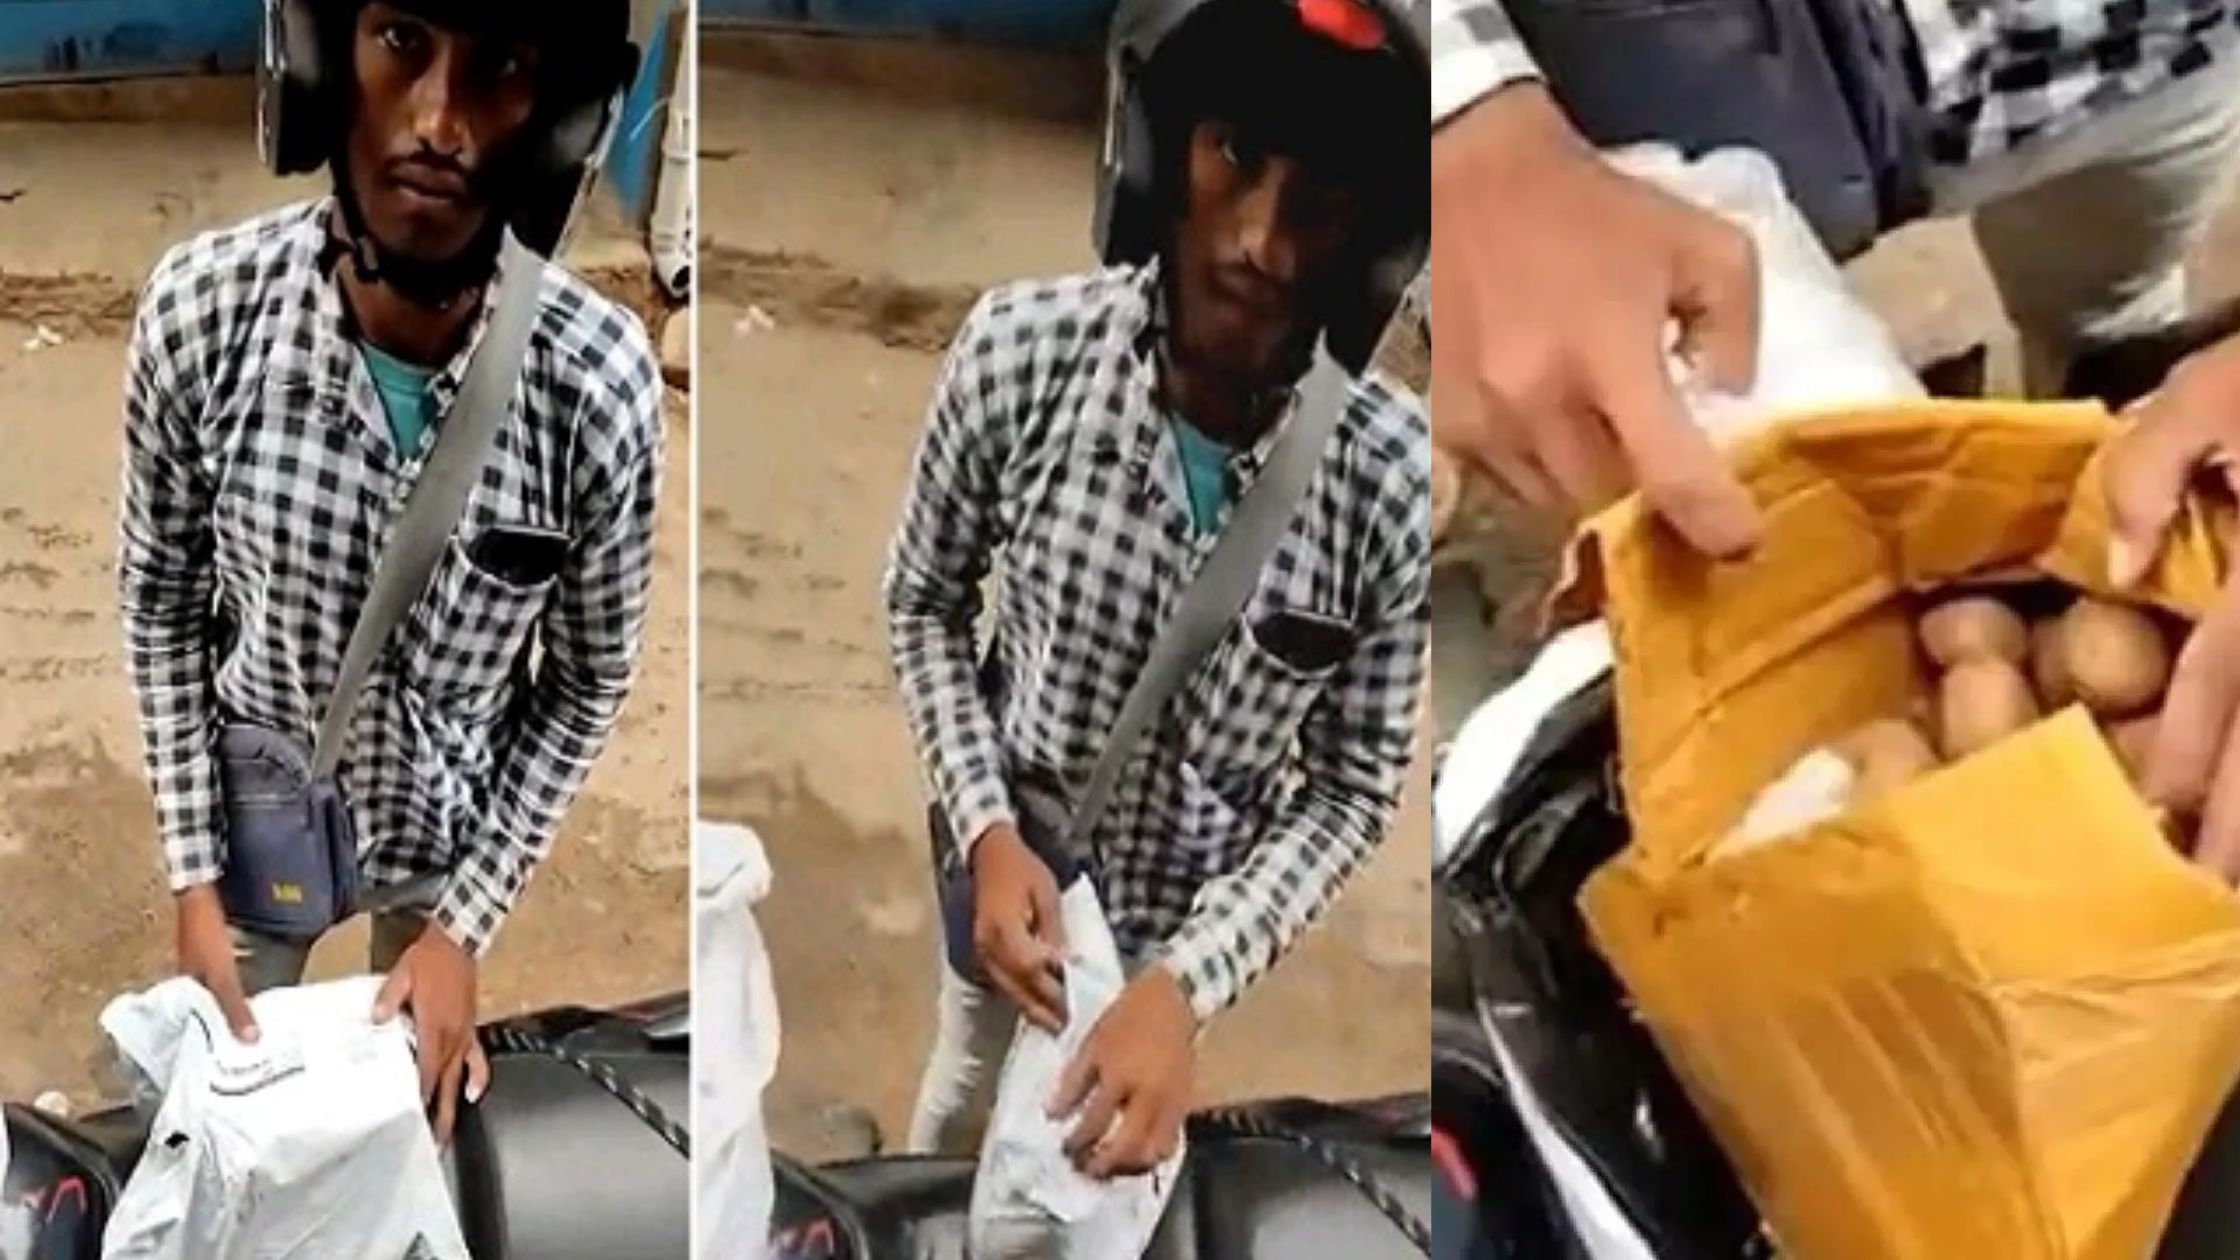 Delivery boy arrived with potatoes instead of drones